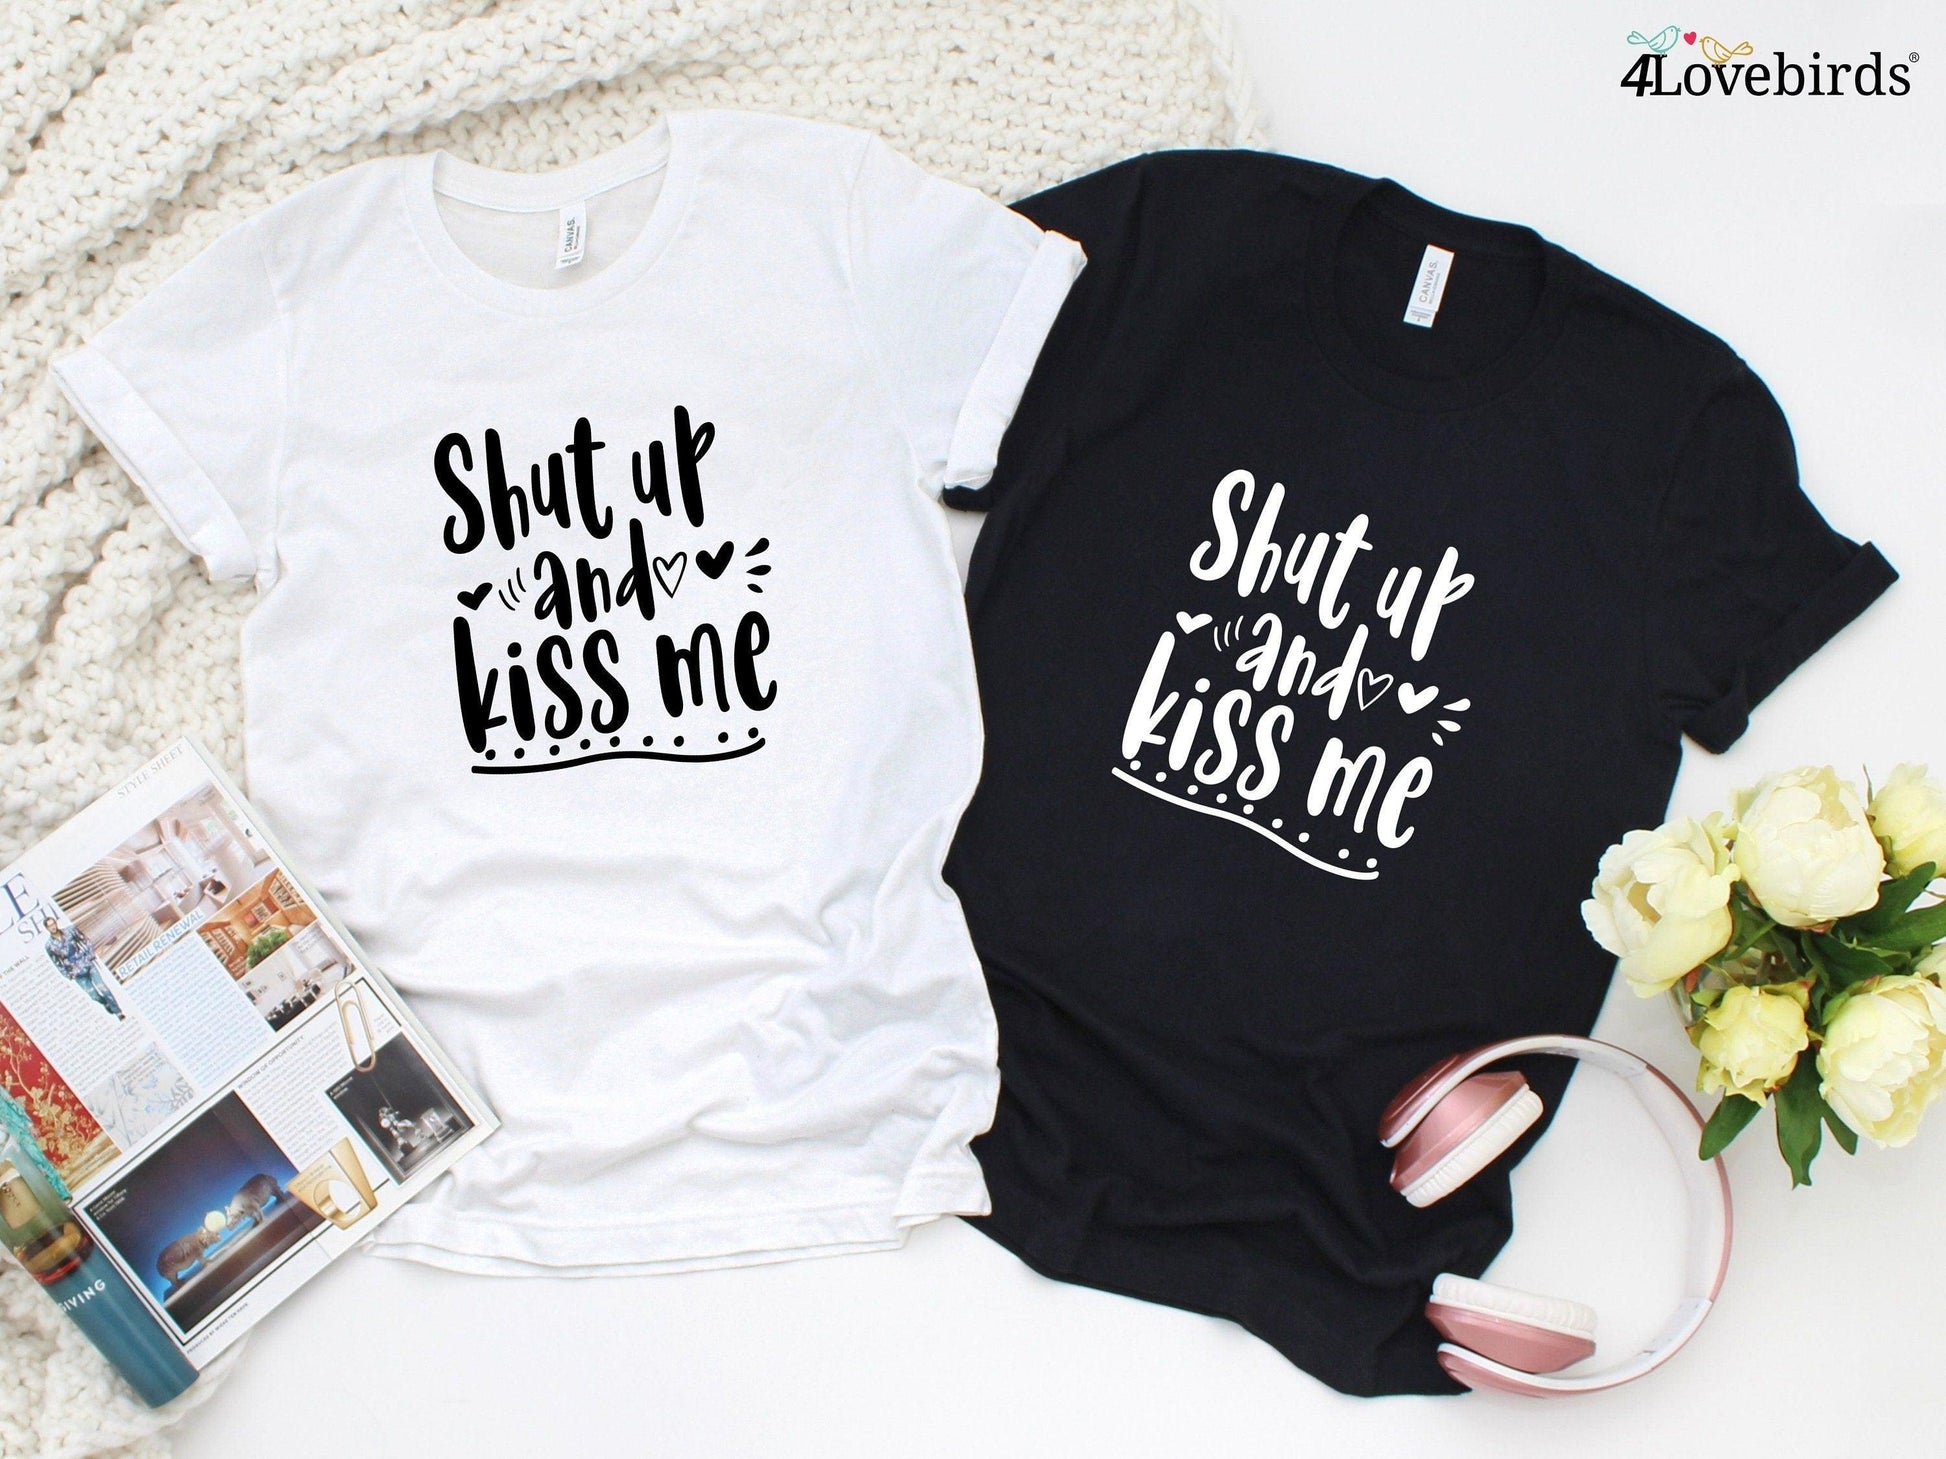 Shut up and kiss me 1 Hoodie, Funny T-shirt, Gift for Couples, Valentine Sweatshirt, Boyfriend and Girlfriend Longsleeve - 4Lovebirds